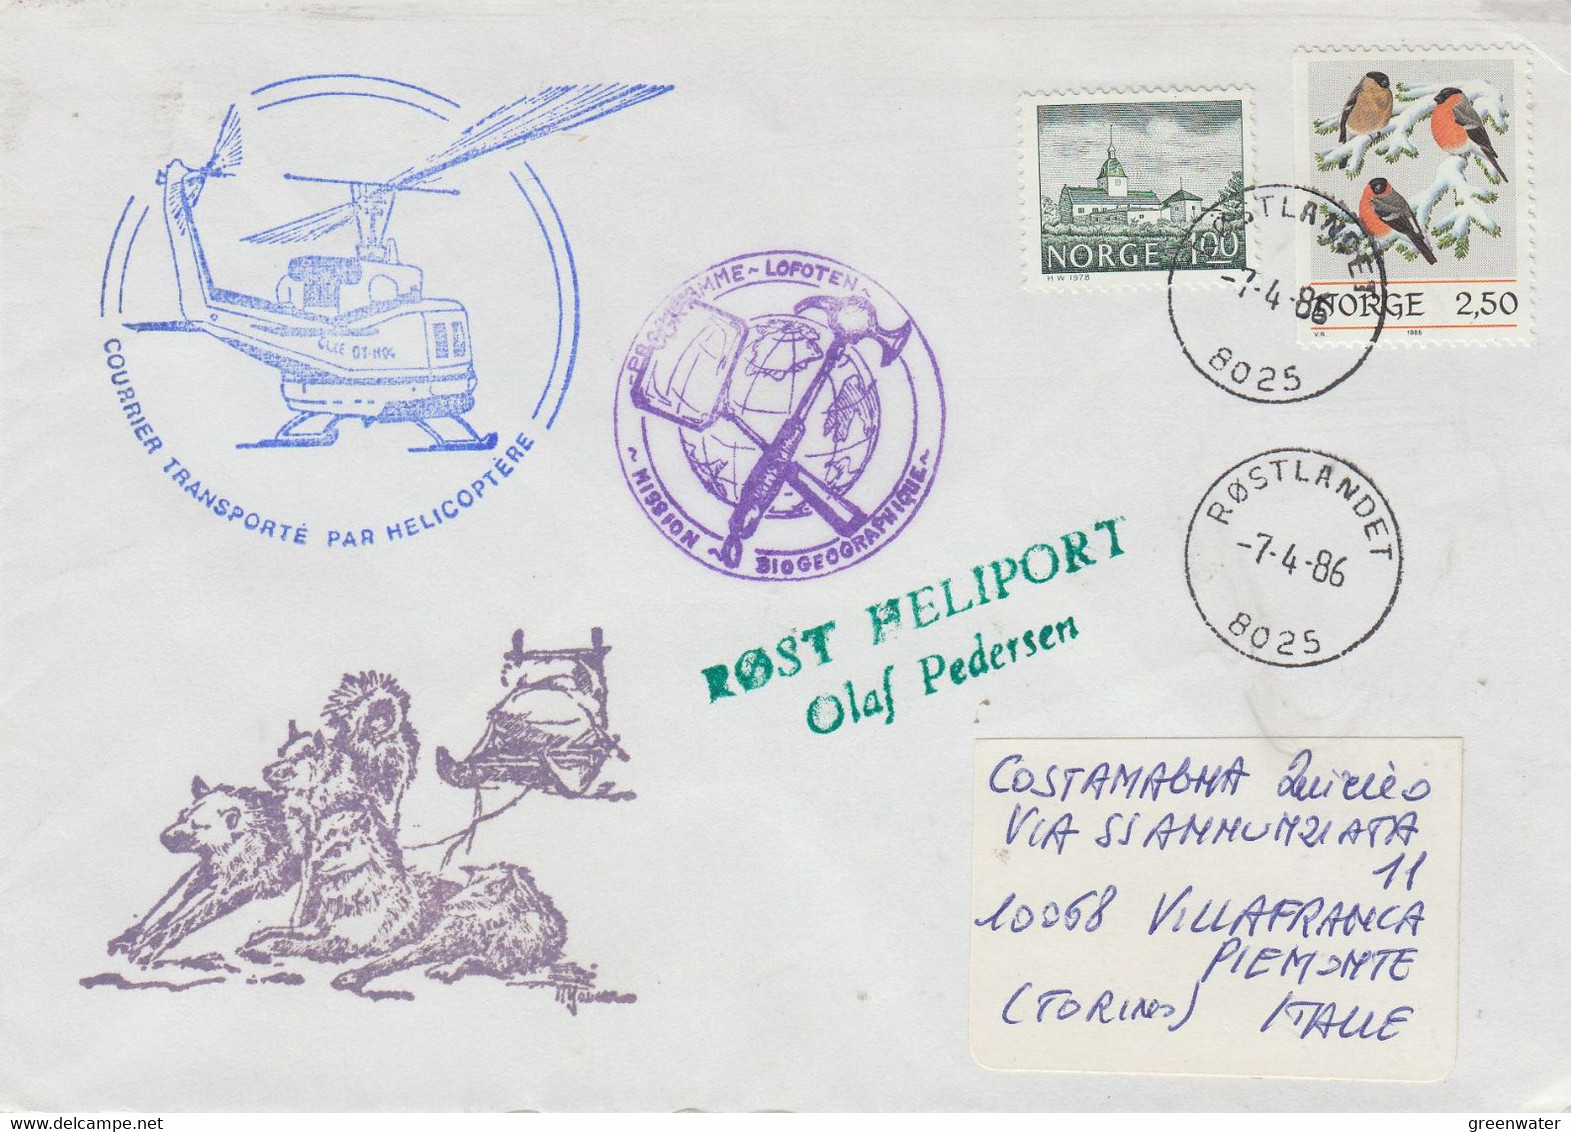 Norway 1986 Mission Geographique Rost Heliport Cover Ca Rostlandet 7-4-1986 (NW202) - Forschungsprogramme